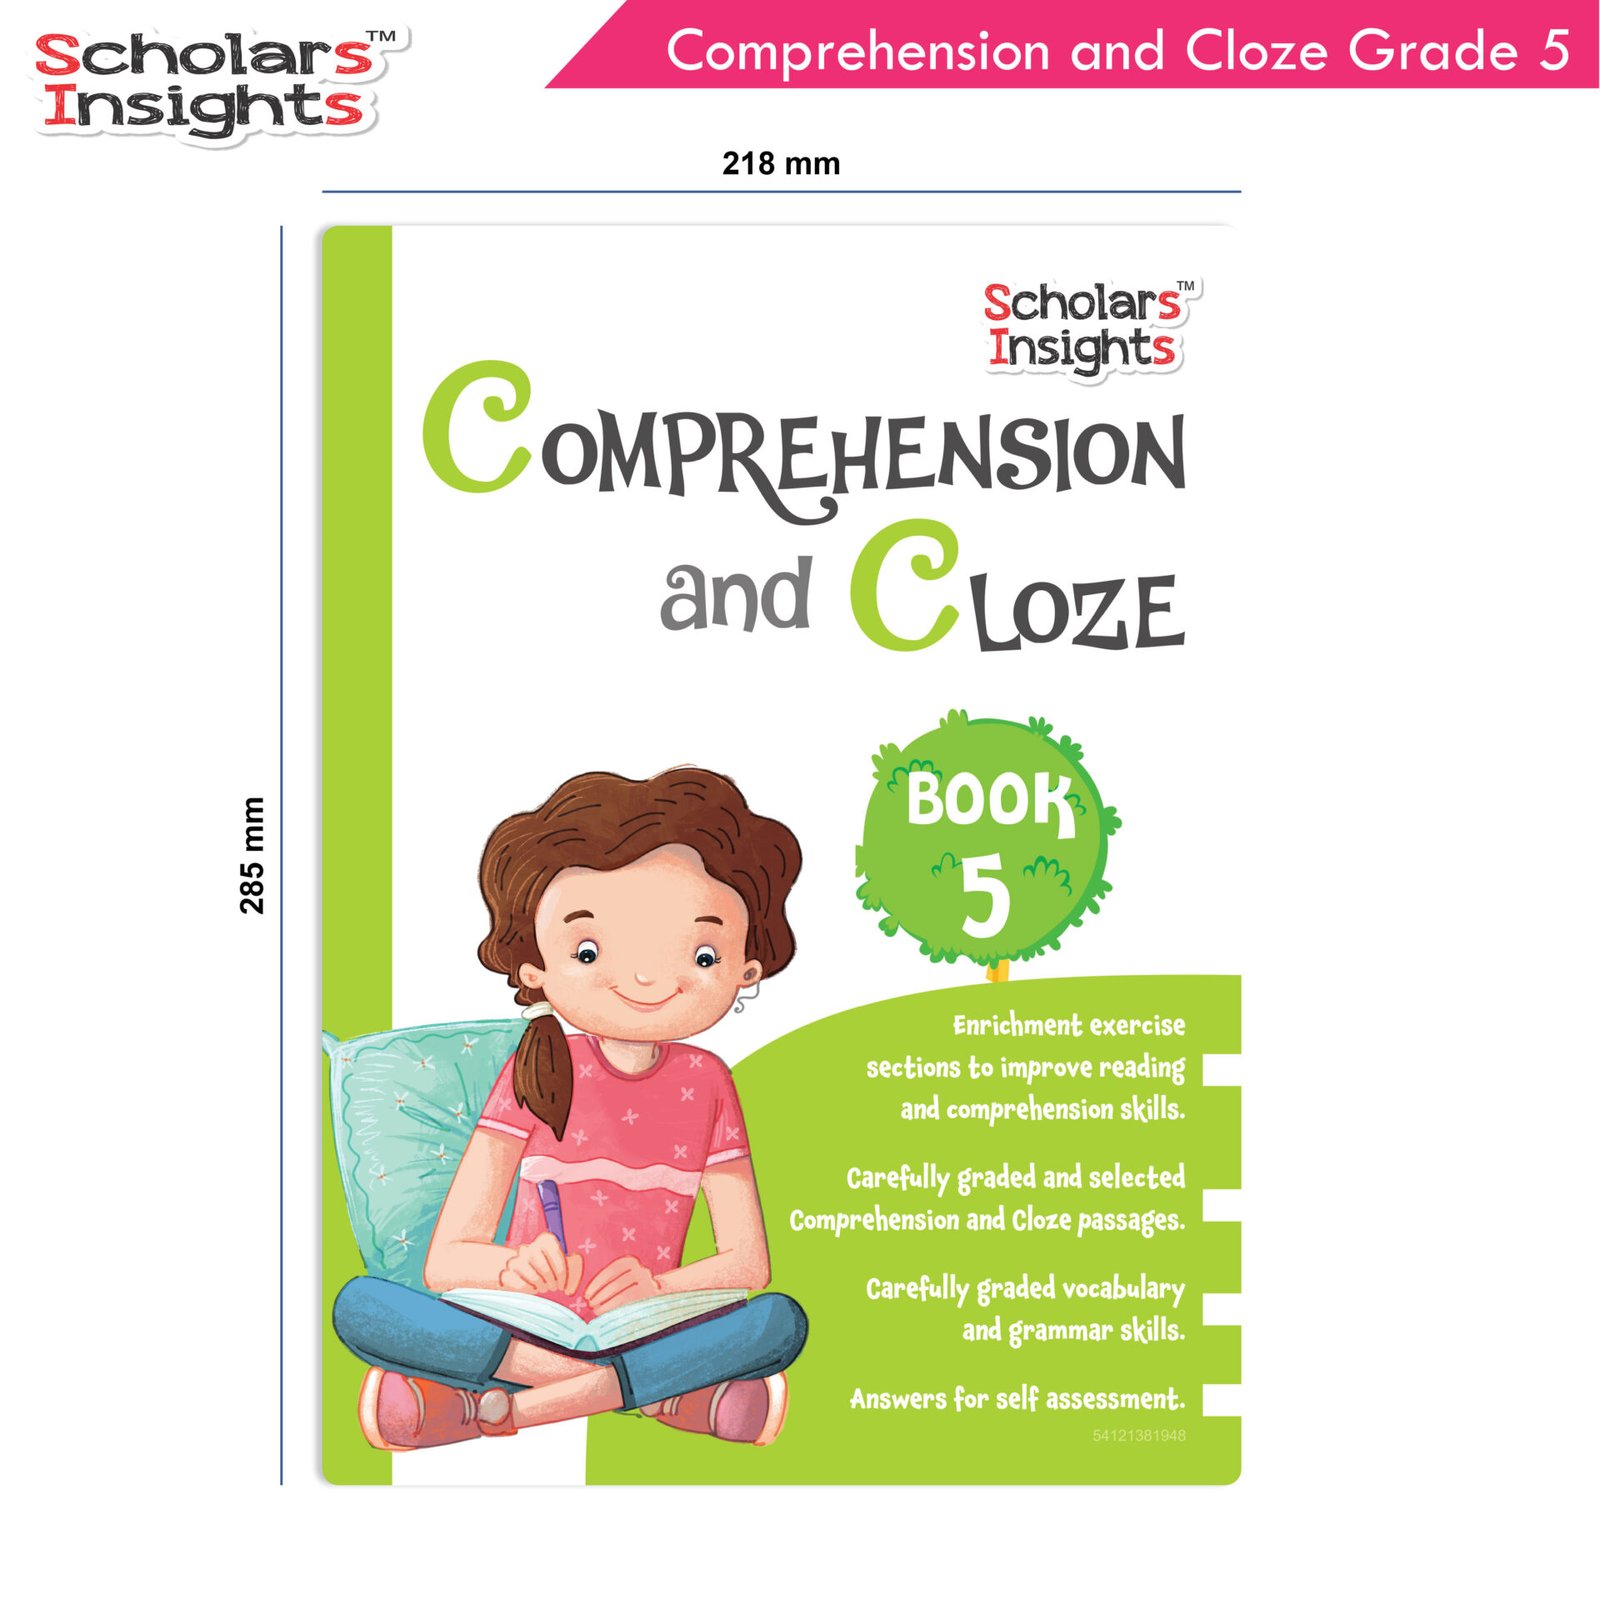 Scholars Insights Comprehension and Cloze Grade 5 2 1